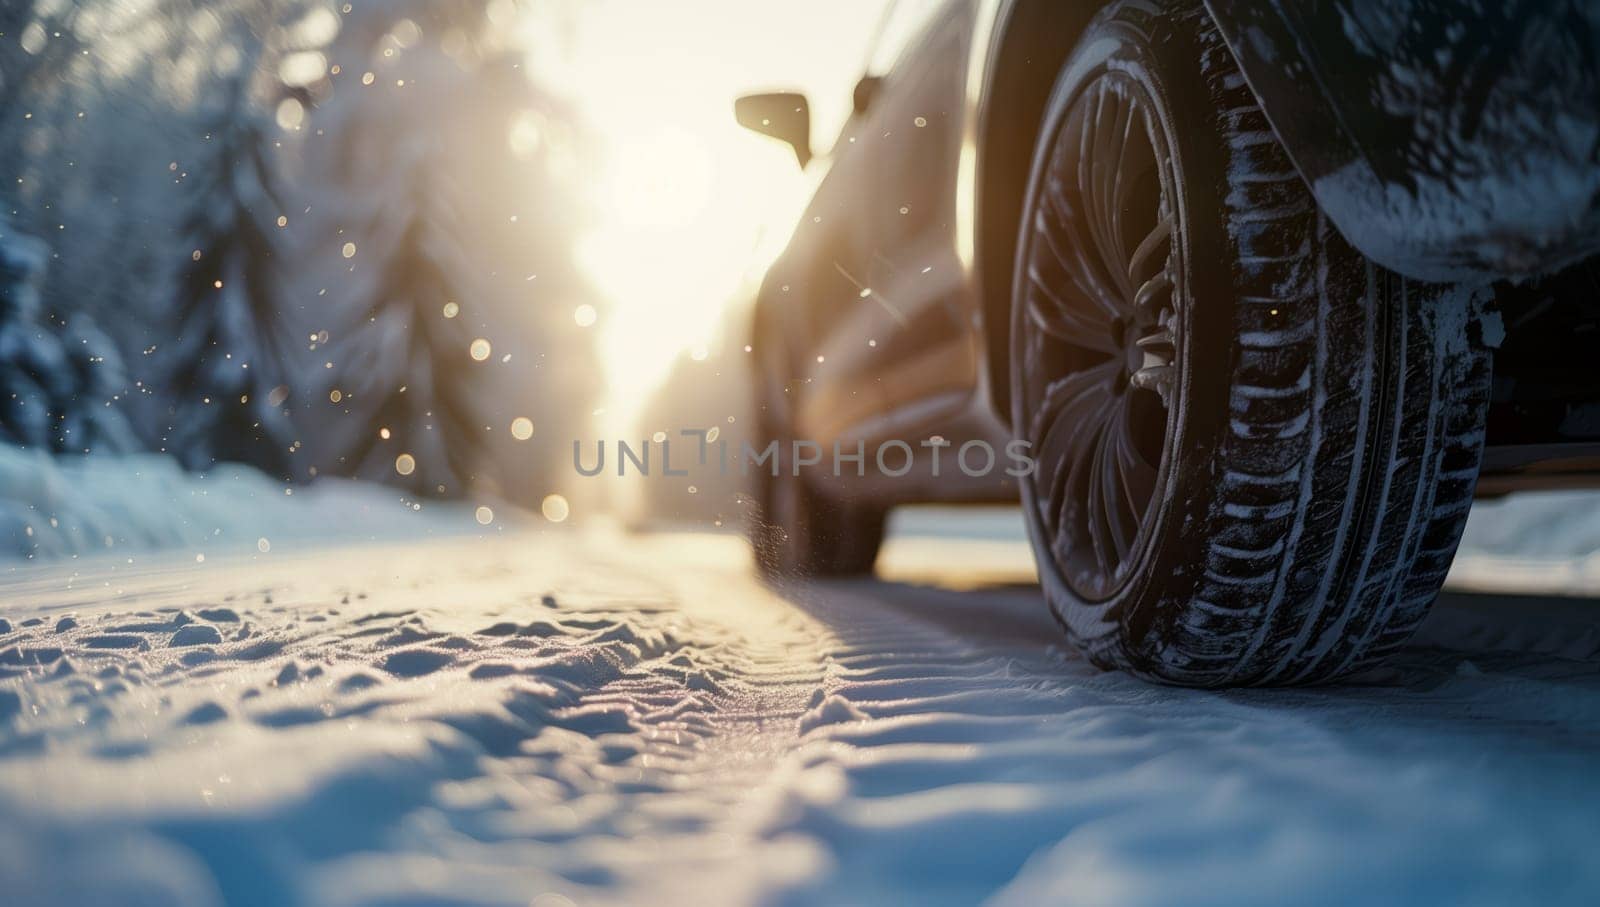 A vehicle equipped with automotive tires is driving on a snowy road, its wheel treads gripping the asphalt as it navigates the winter weather